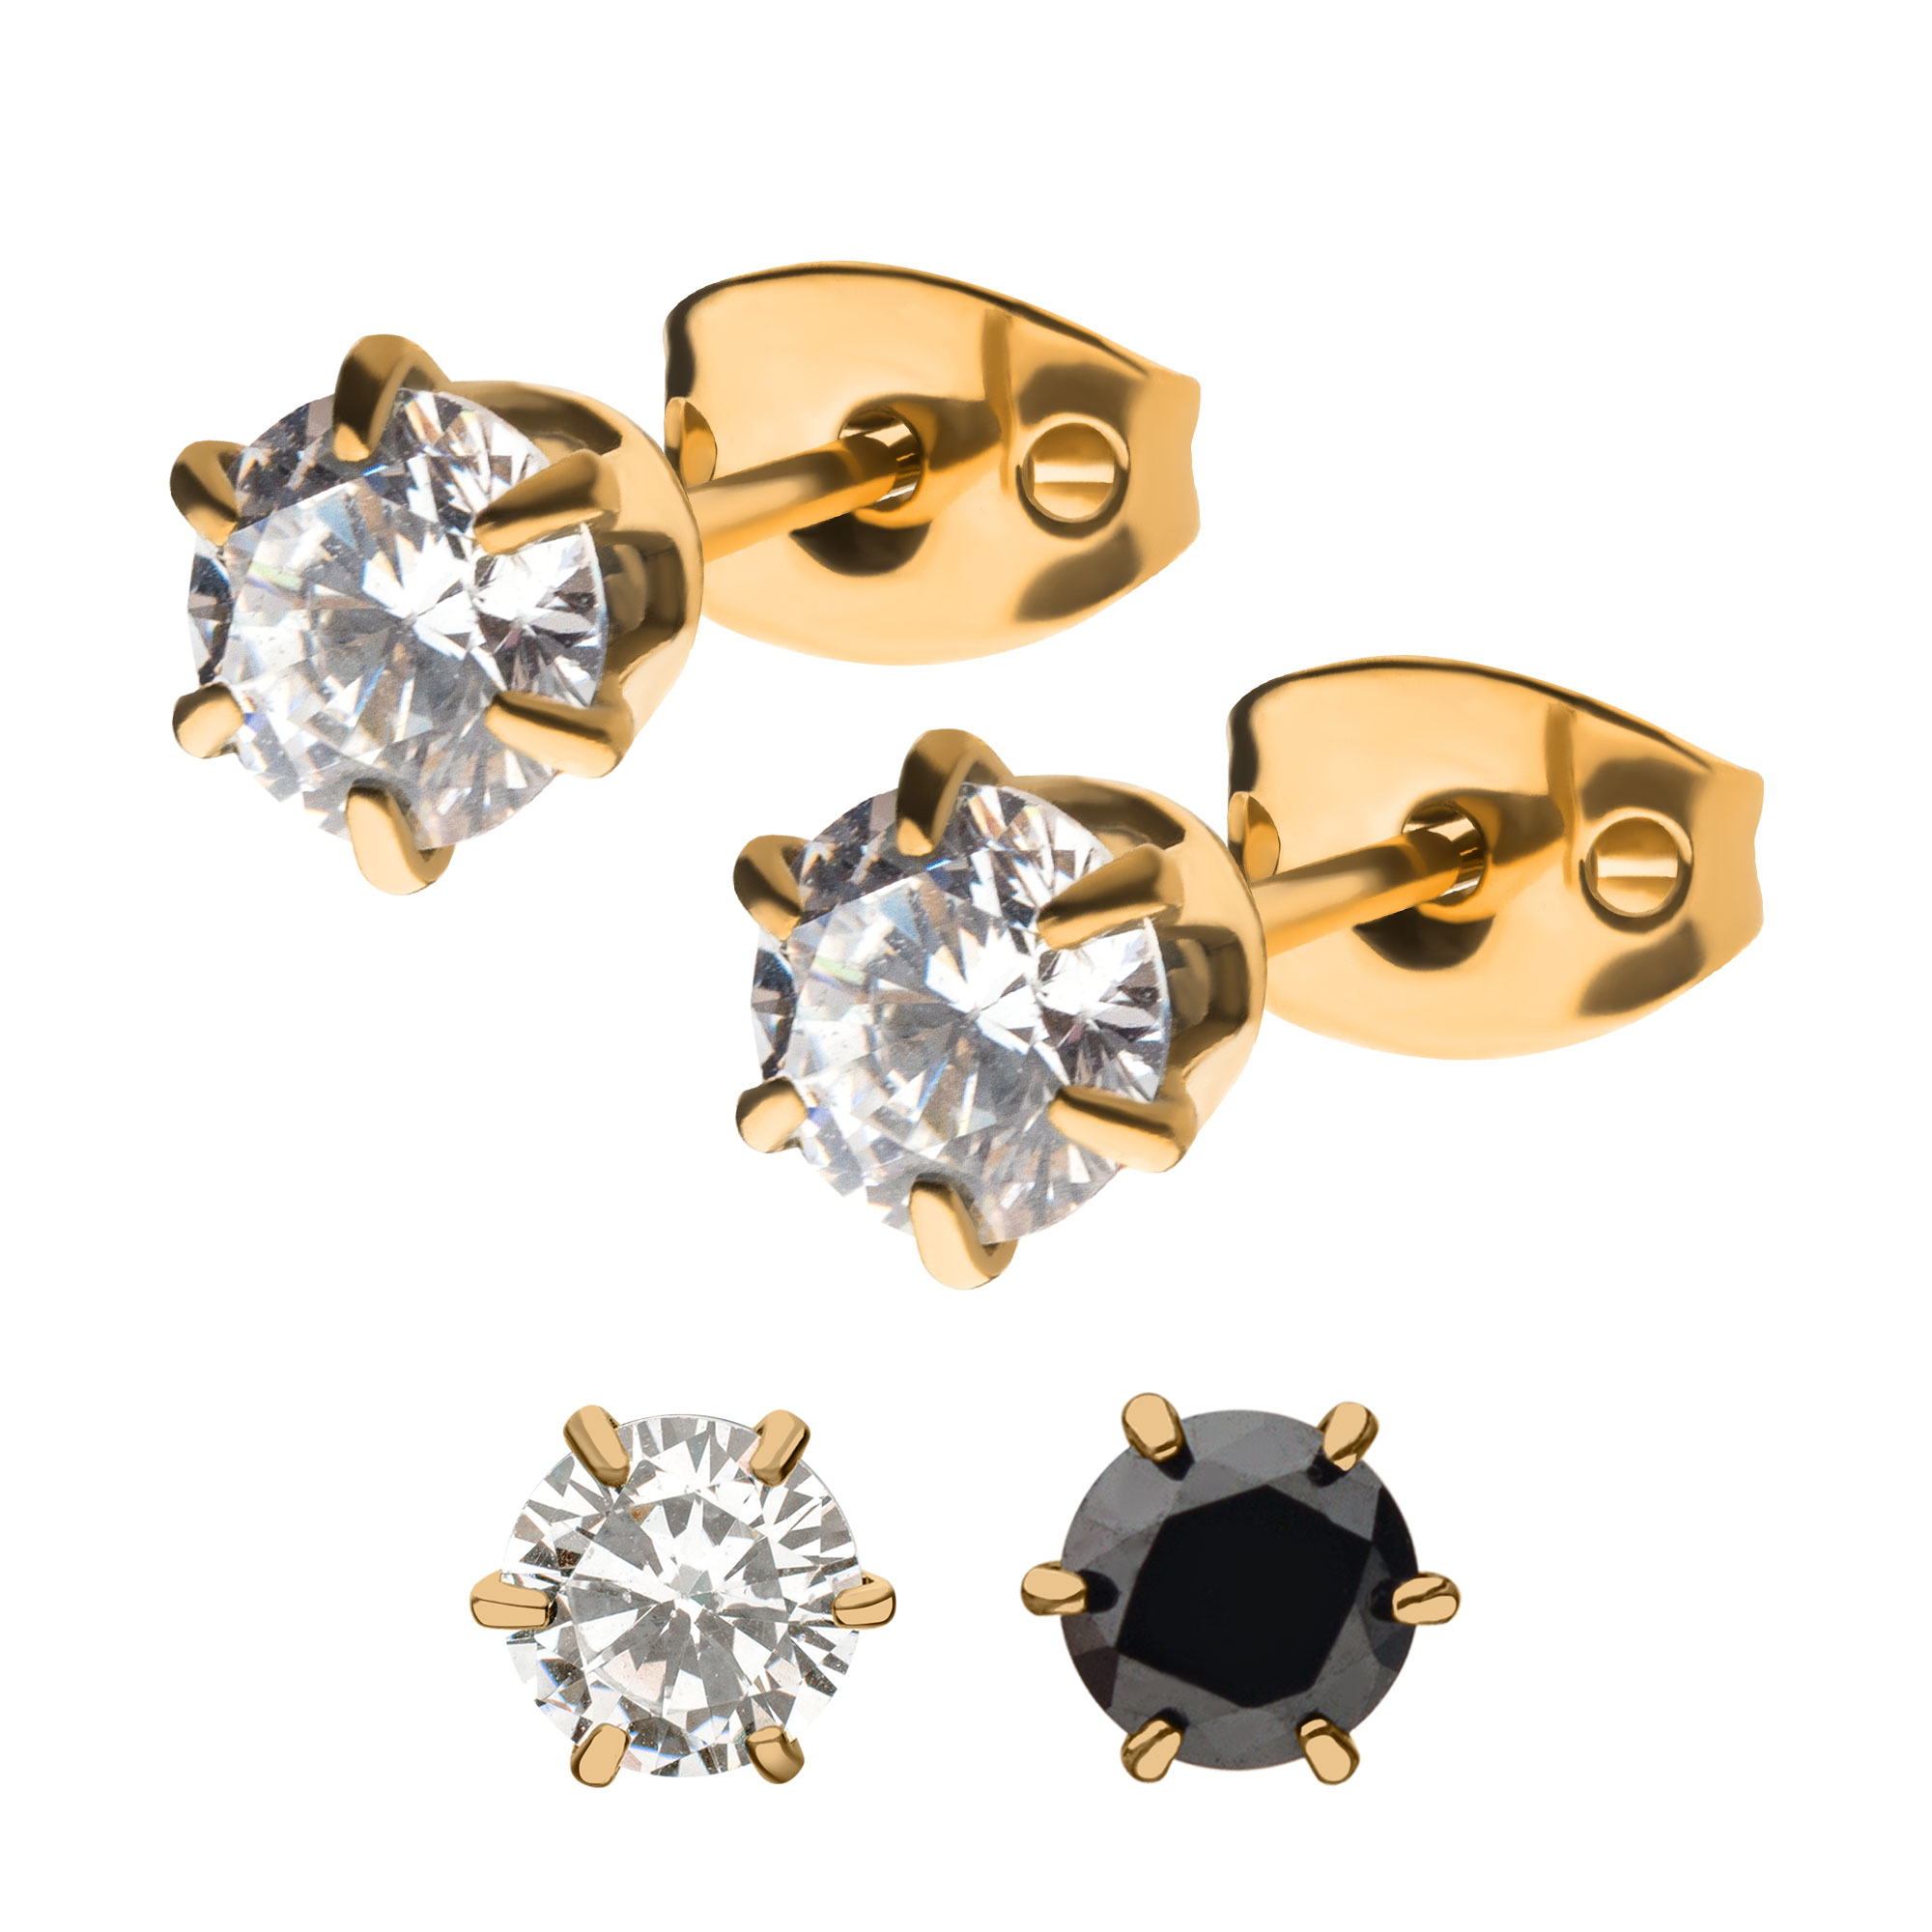 24Kt Gold PVD Titanium with 6-Prong Set Round CZ with Butterfly Back Stud Earrings